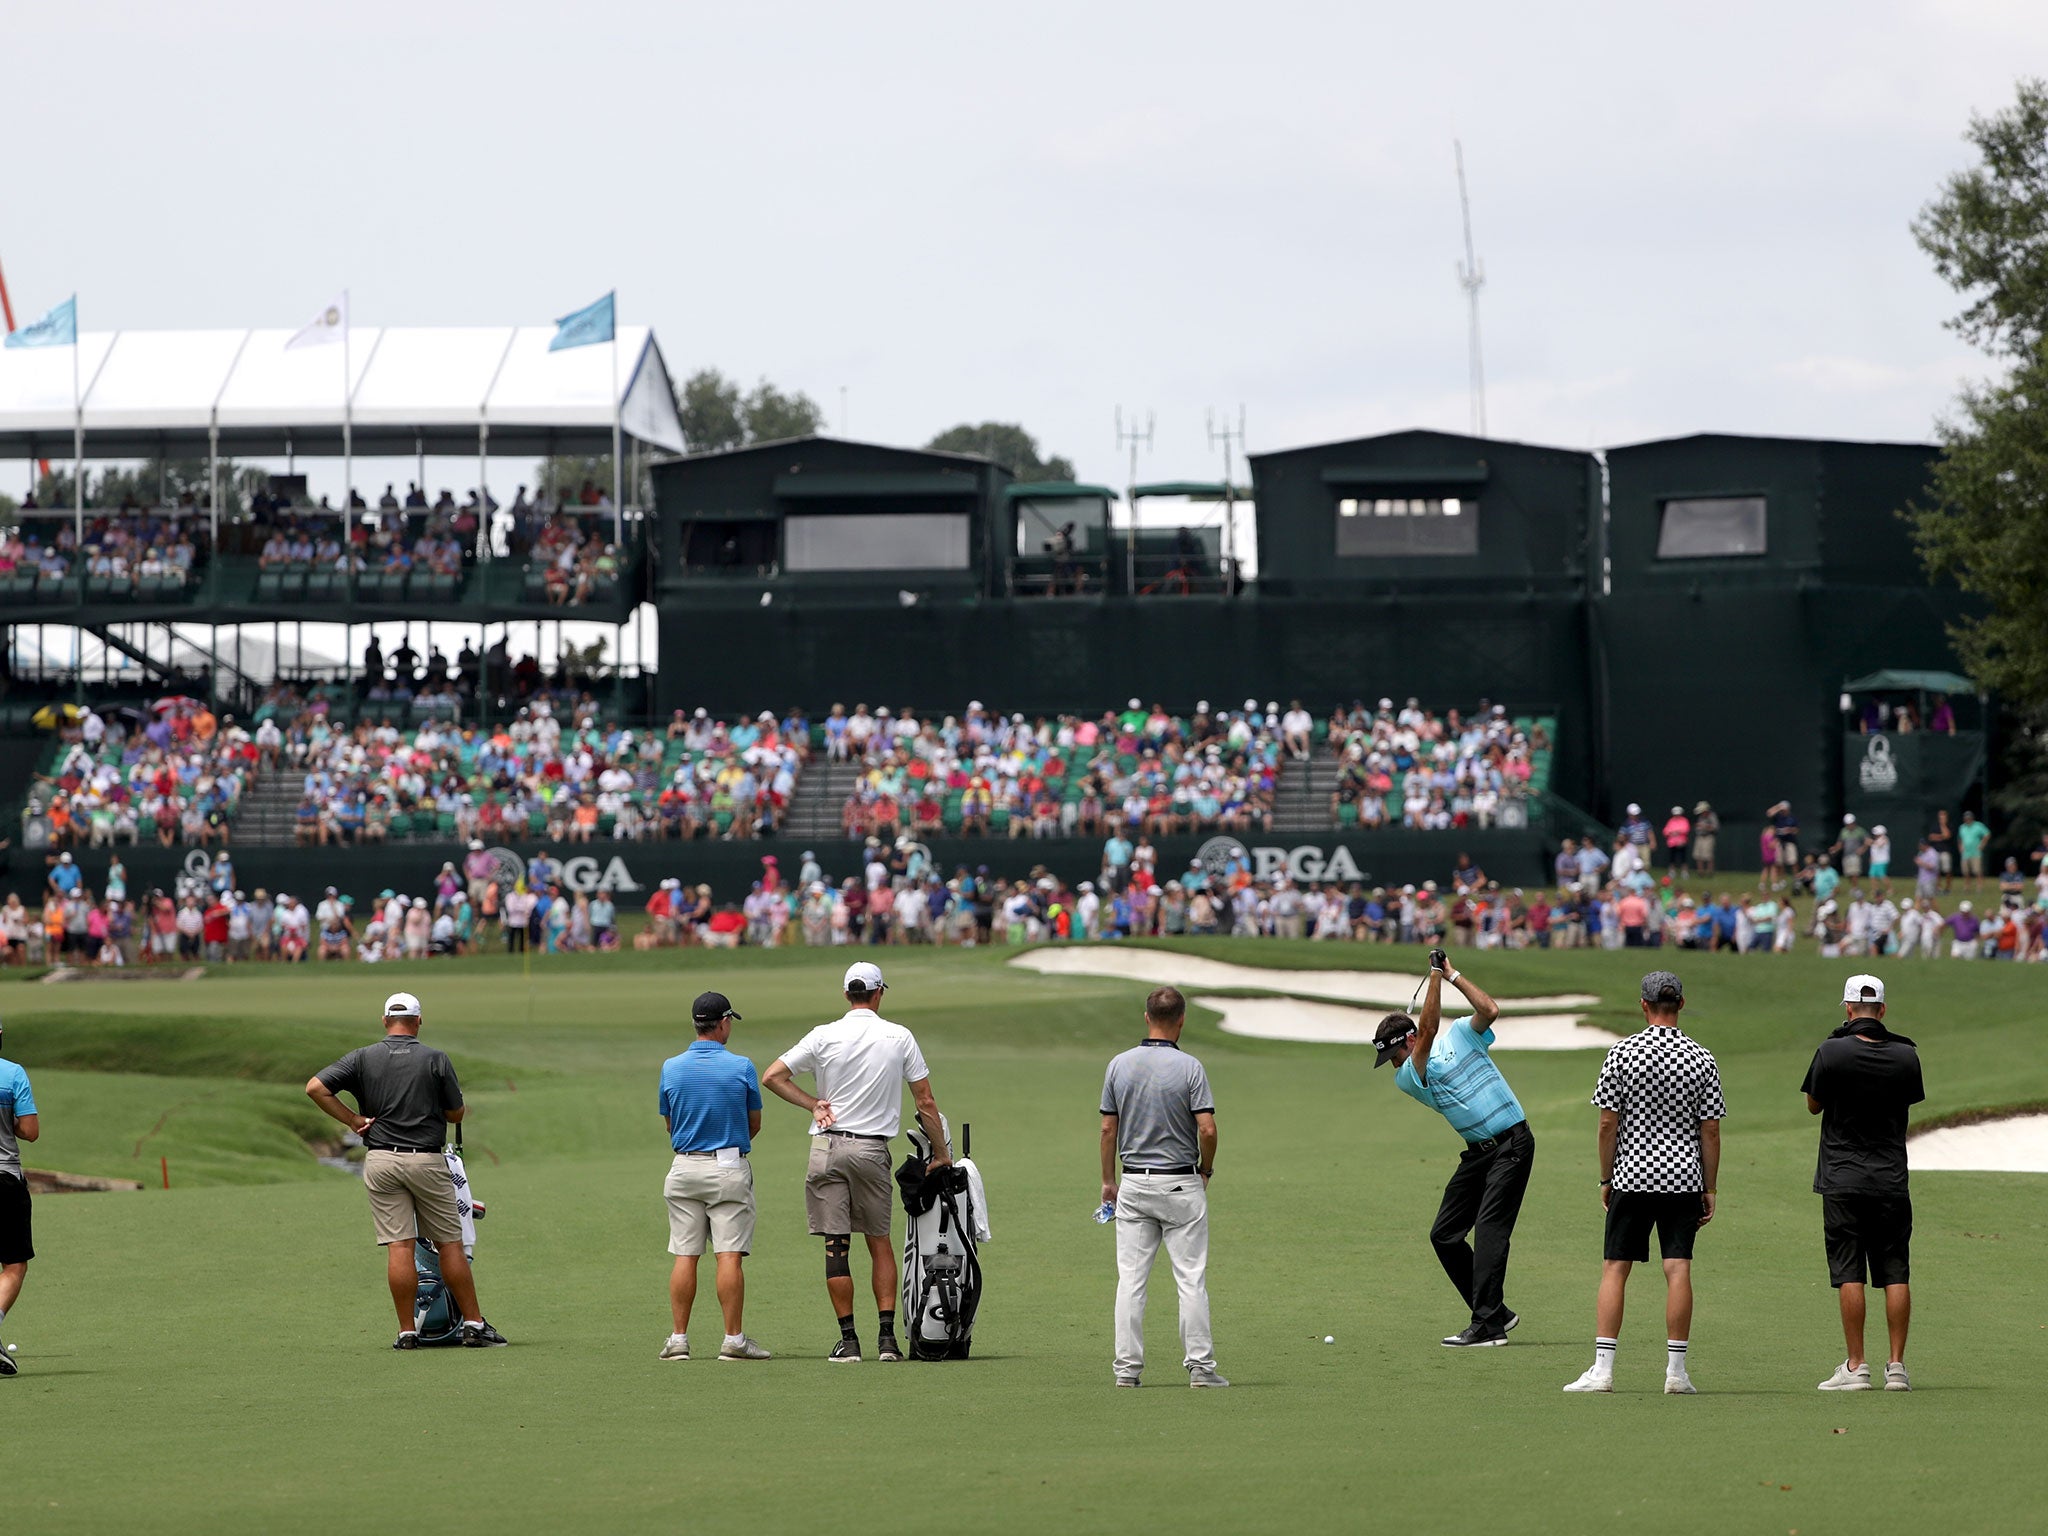 The first day of the PGA Championship gets underway on Thursday